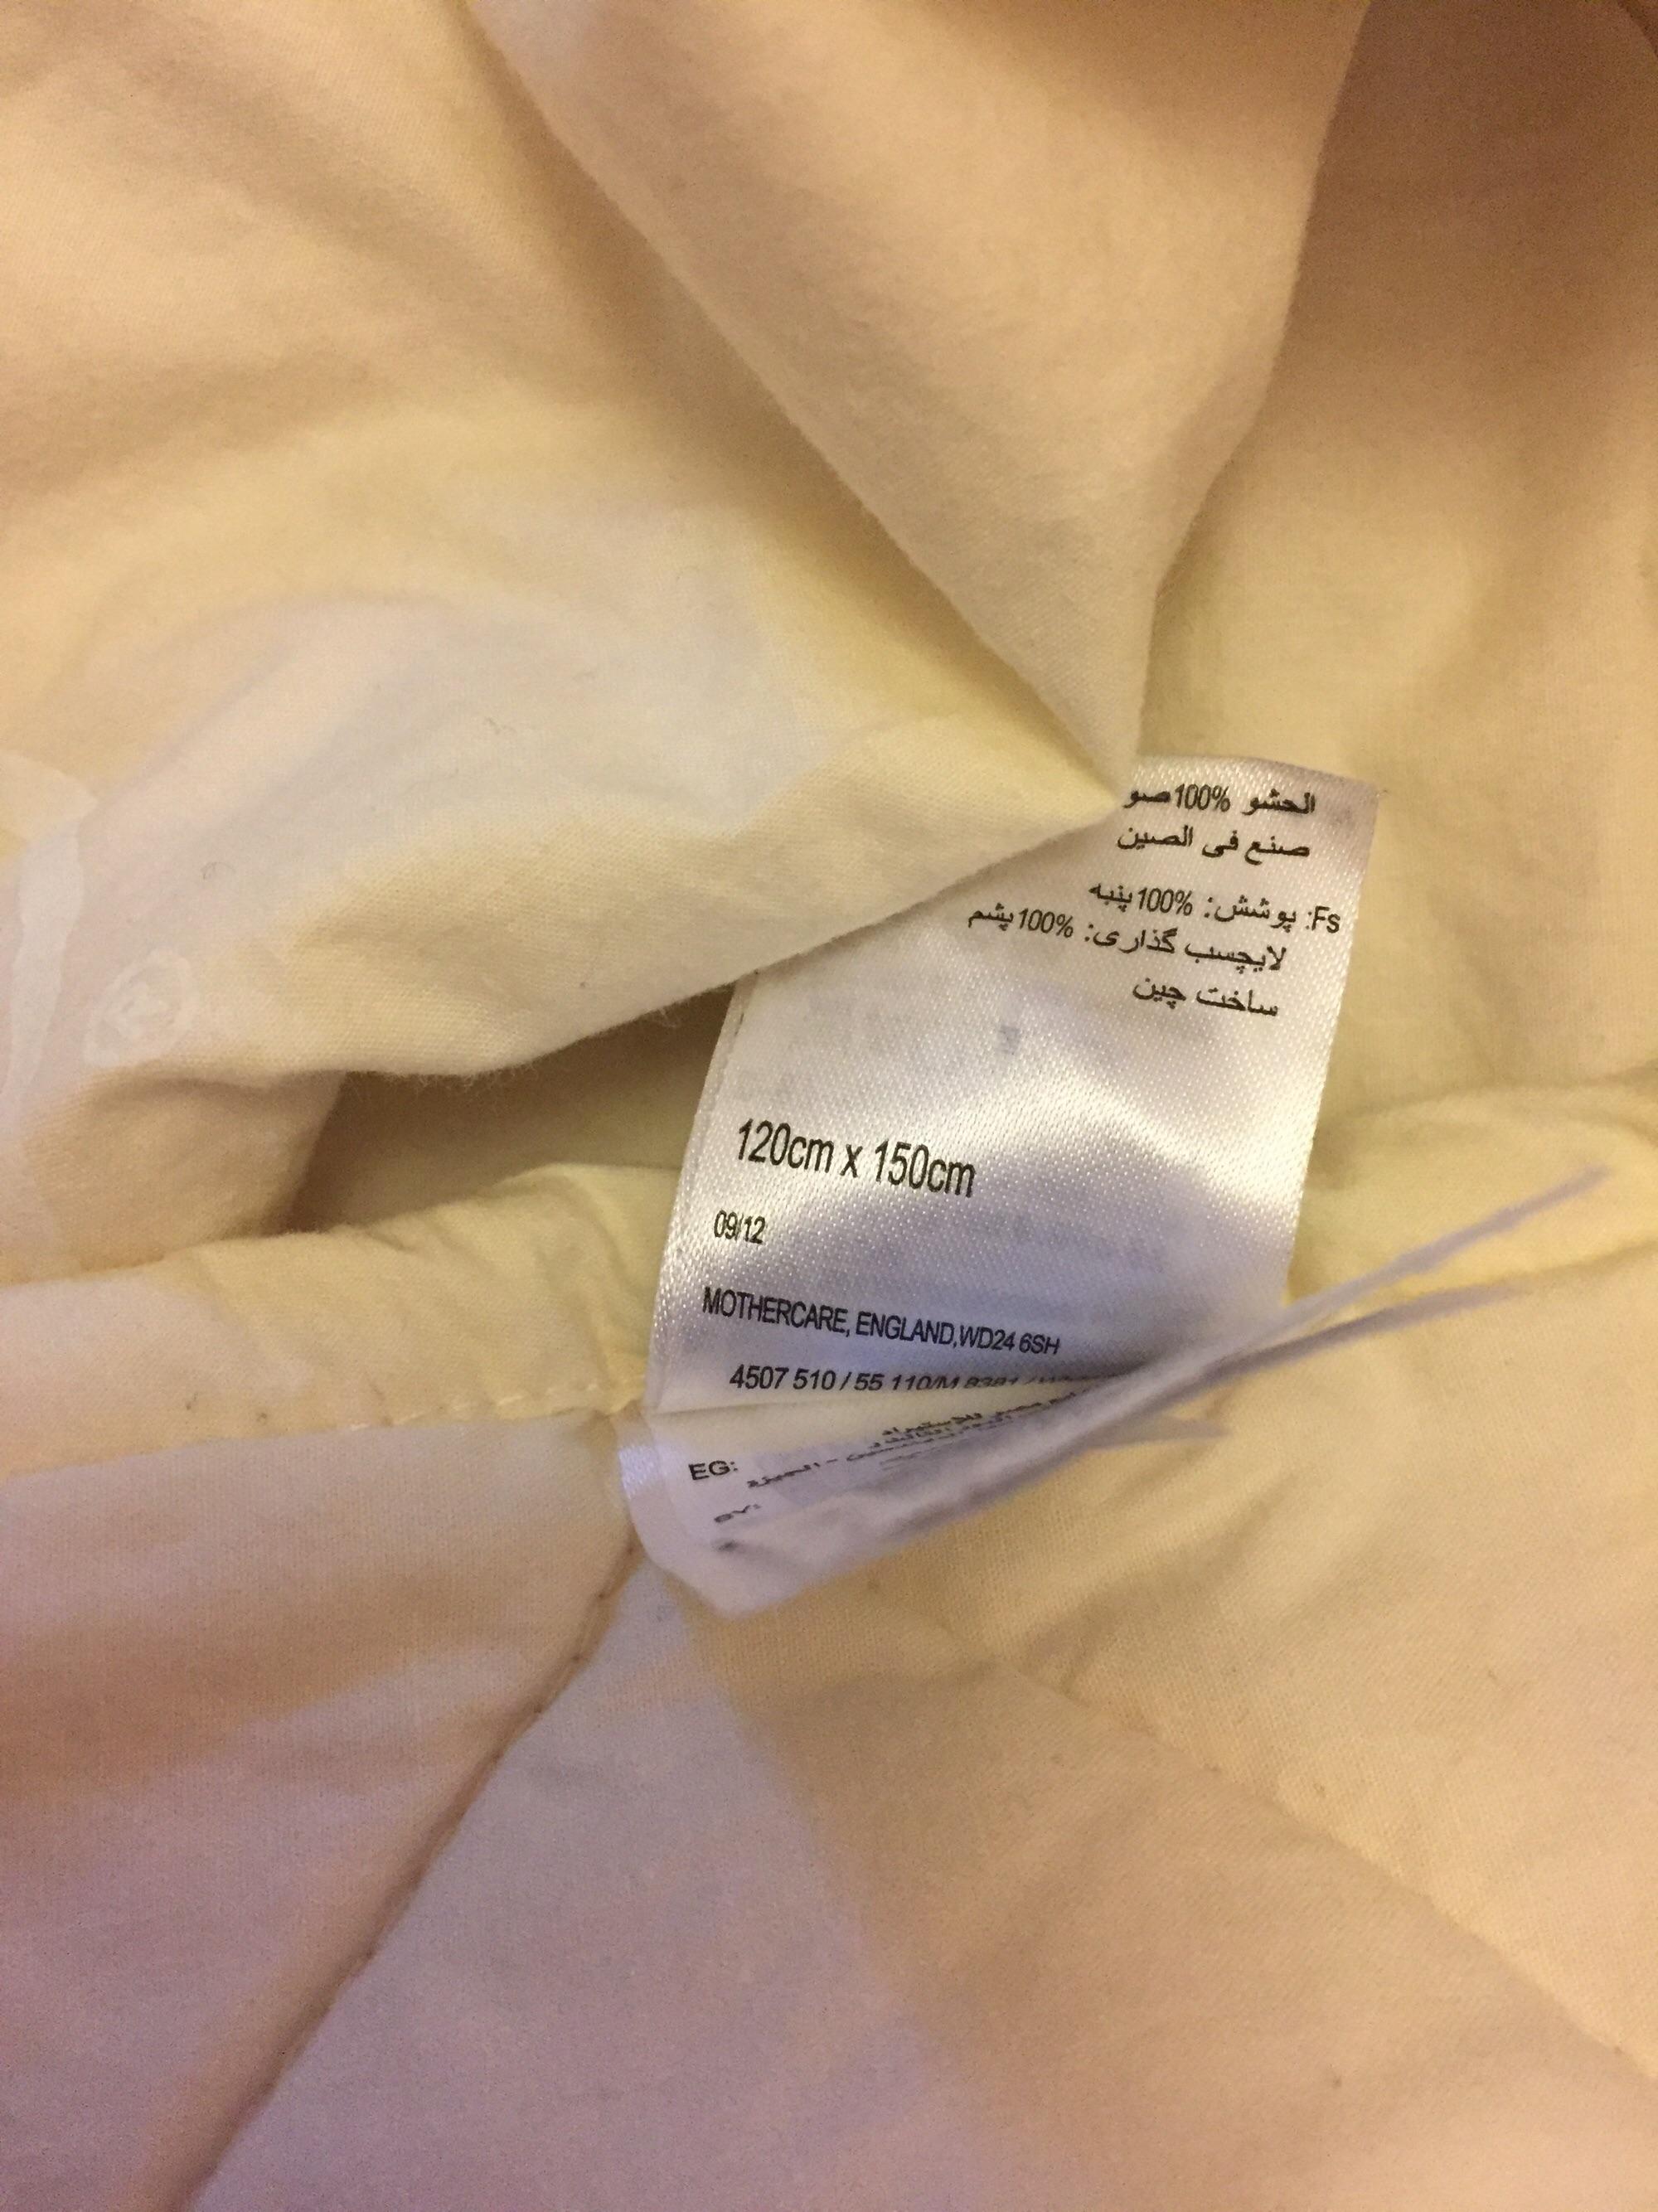 Mothercare Temperature Control Duvet Cot Bed In Epping Forest Fur